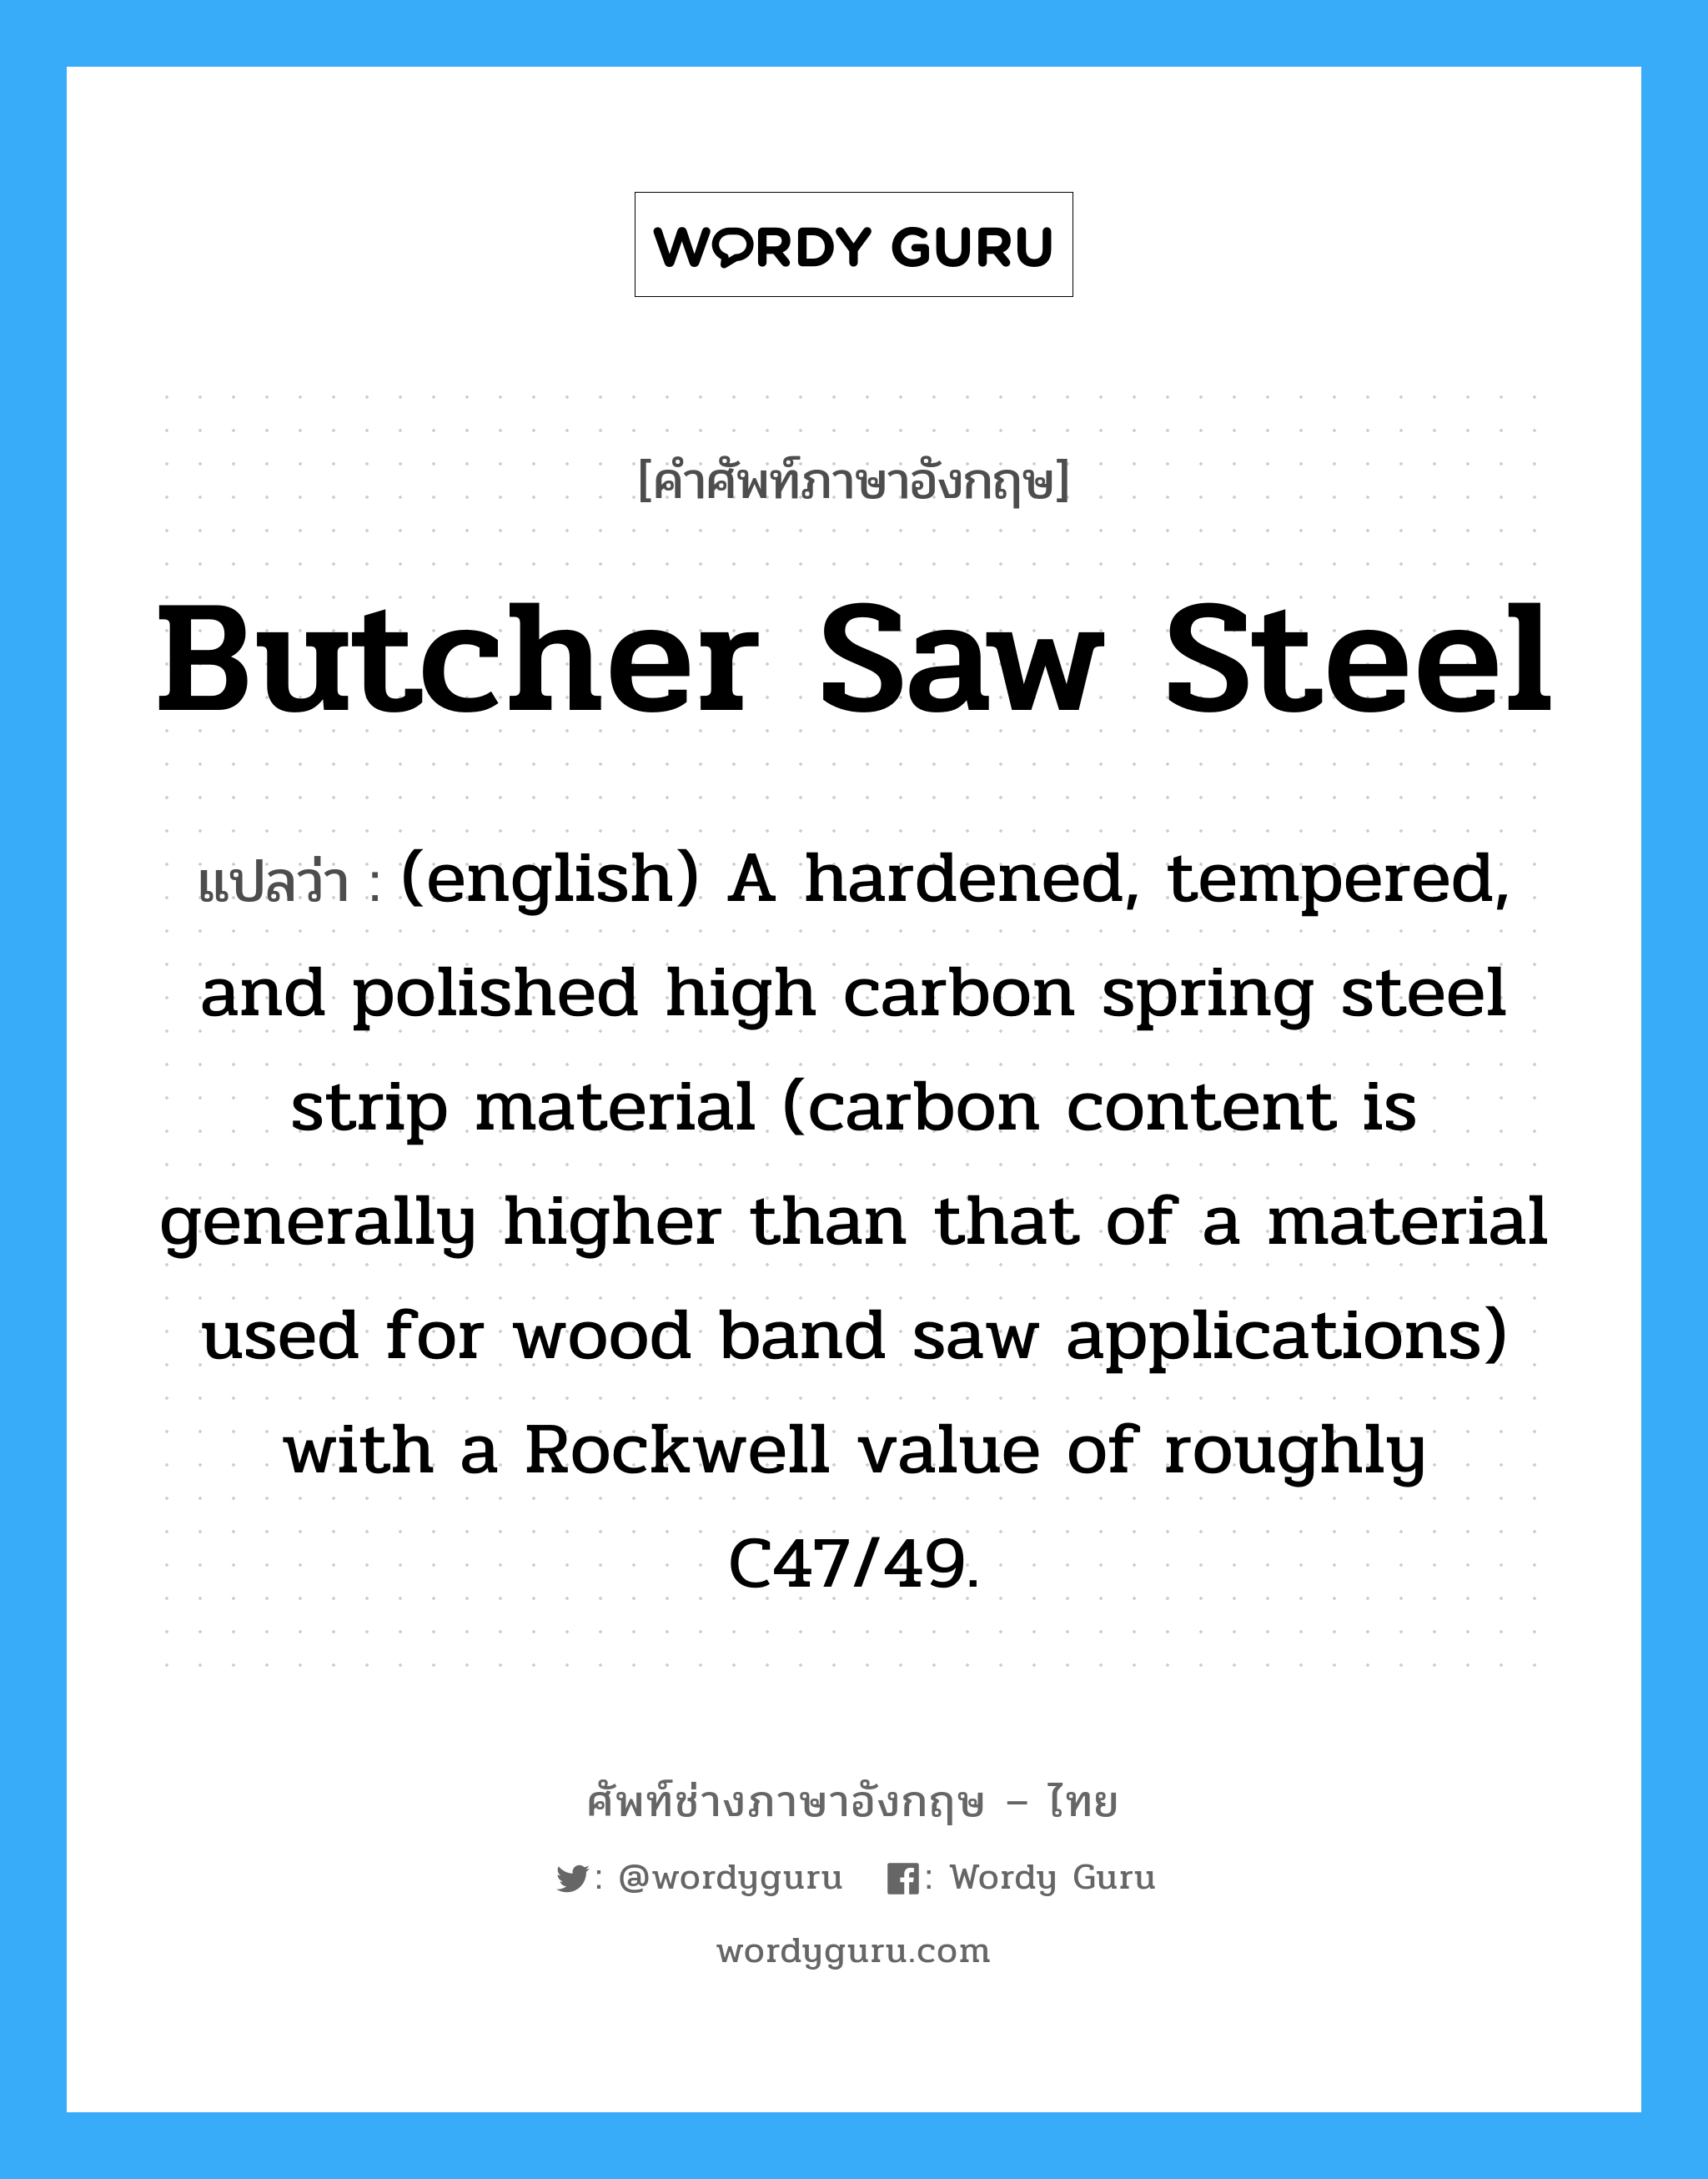 (english) A hardened, tempered, and polished high carbon spring steel strip material (carbon content is generally higher than that of a material used for wood band saw applications) with a Rockwell value of roughly C47/49. ภาษาอังกฤษ?, คำศัพท์ช่างภาษาอังกฤษ - ไทย (english) A hardened, tempered, and polished high carbon spring steel strip material (carbon content is generally higher than that of a material used for wood band saw applications) with a Rockwell value of roughly C47/49. คำศัพท์ภาษาอังกฤษ (english) A hardened, tempered, and polished high carbon spring steel strip material (carbon content is generally higher than that of a material used for wood band saw applications) with a Rockwell value of roughly C47/49. แปลว่า Butcher Saw Steel